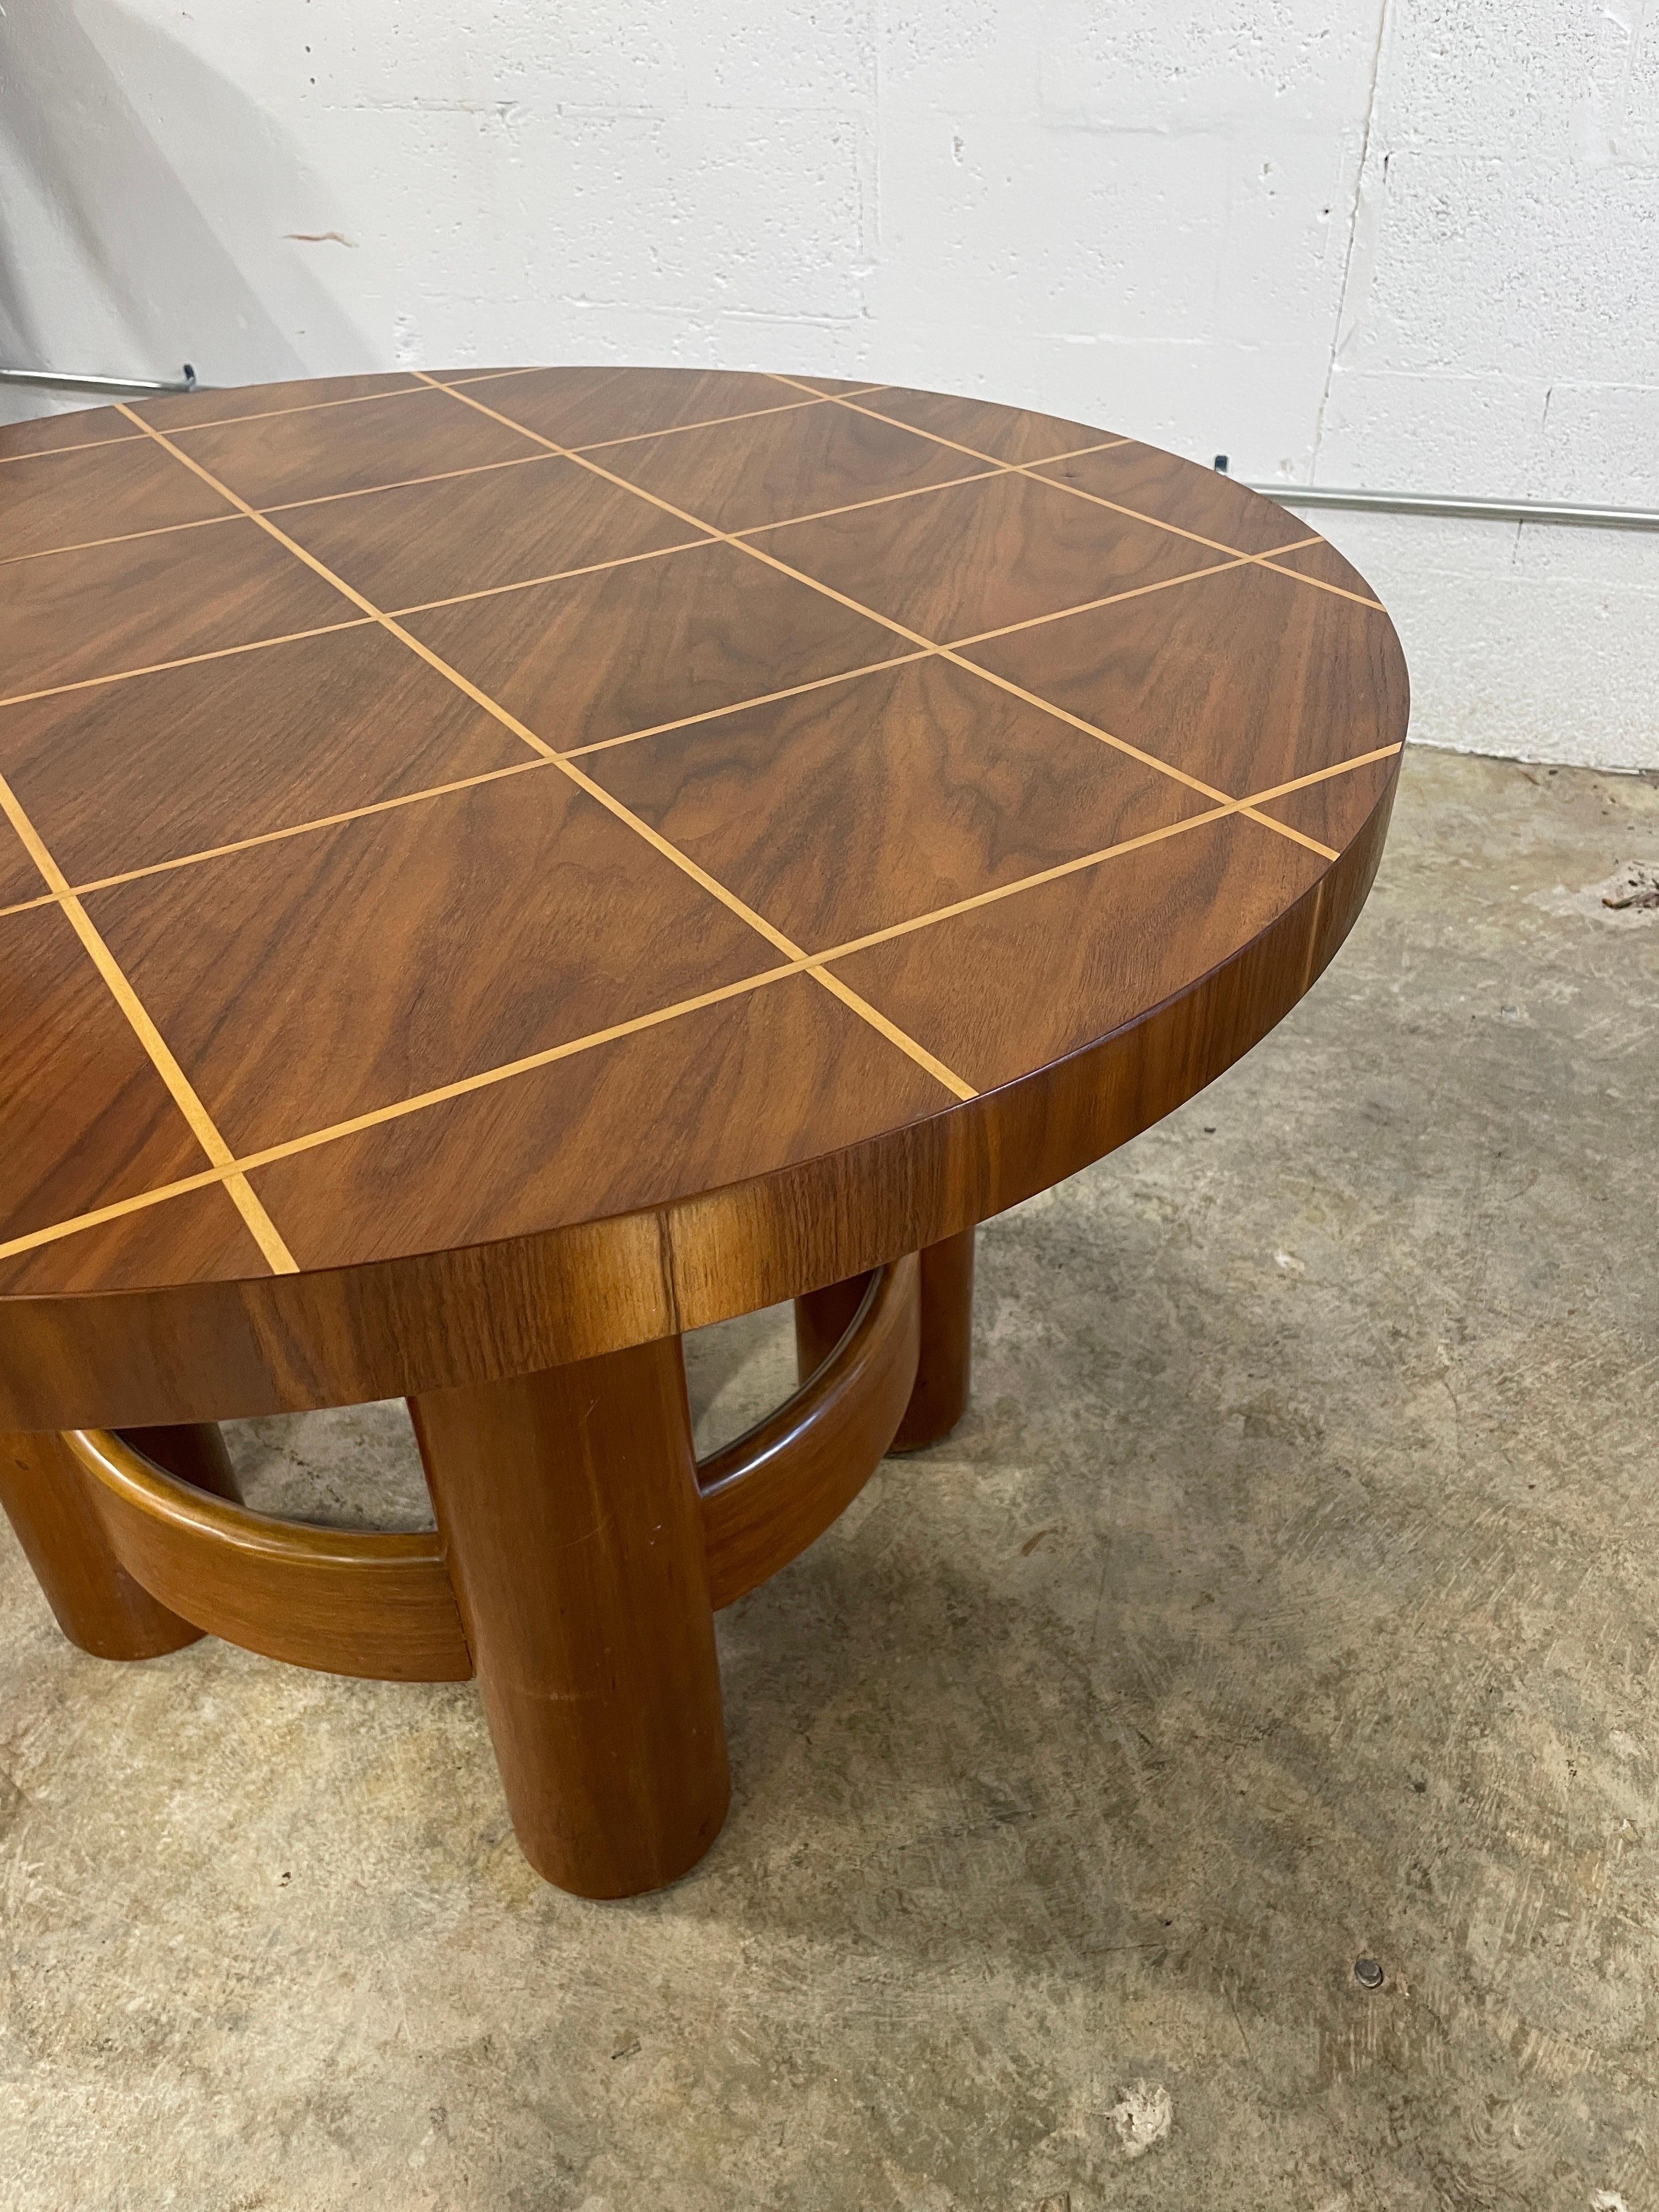 Stunning Round Coffee Table by Reiners. Made in Mjölby, Sweden, 1950s. Geometric inlay on the top and thick round legs. 35diam 23height